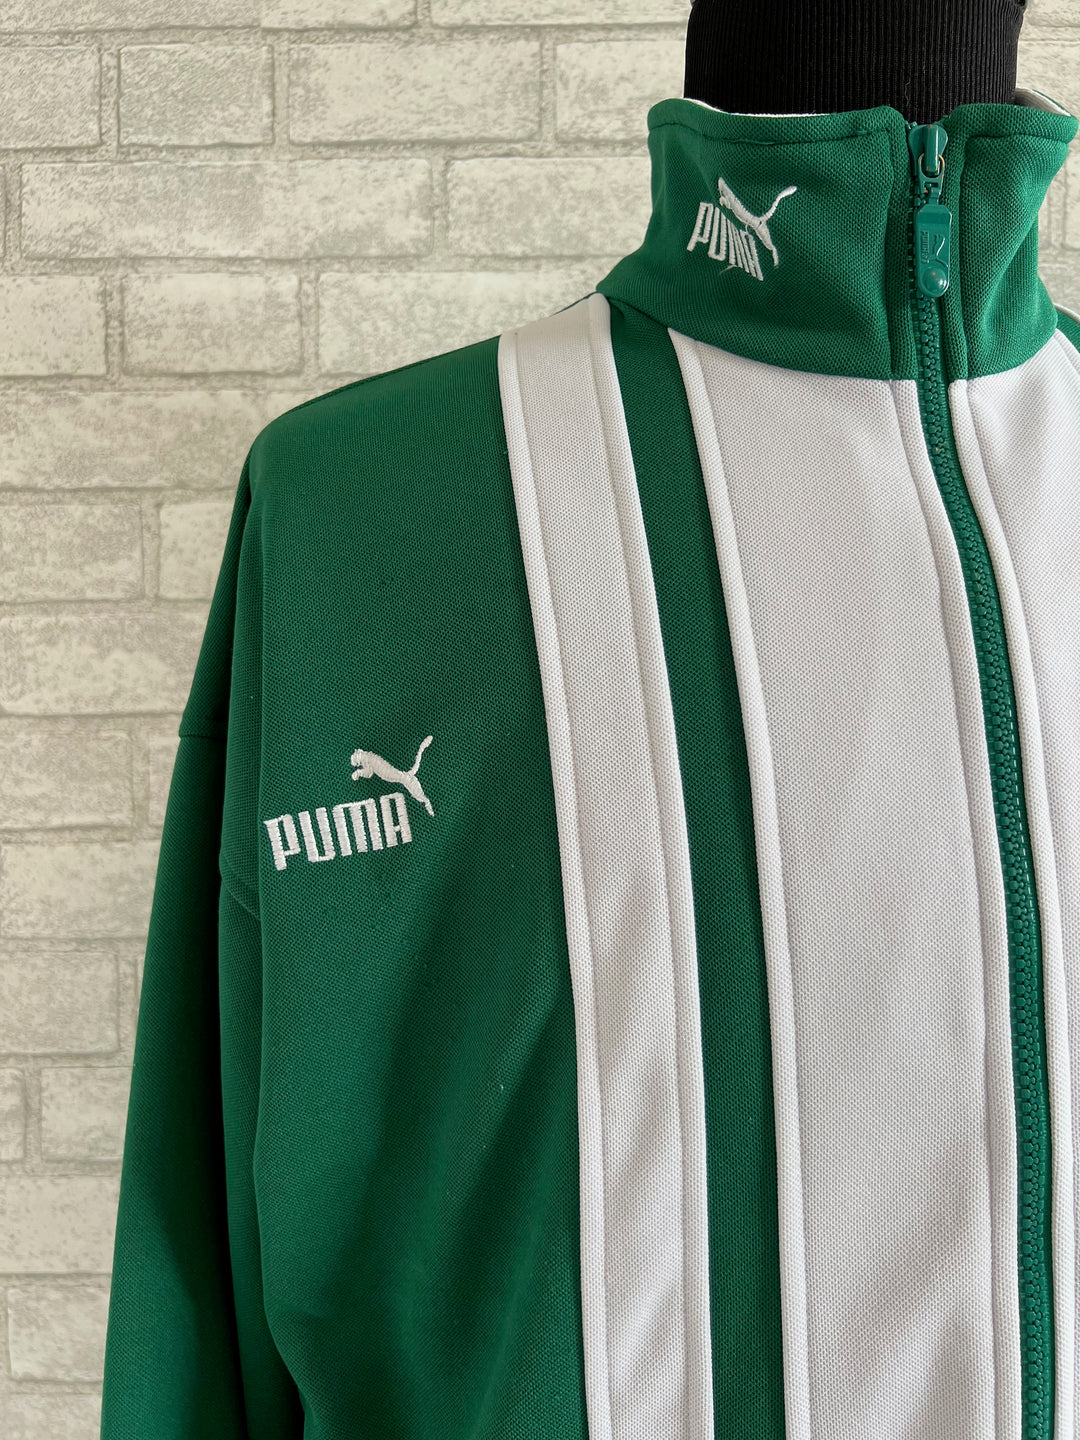 Vintage 80's 90's Puma Green and white Jacket